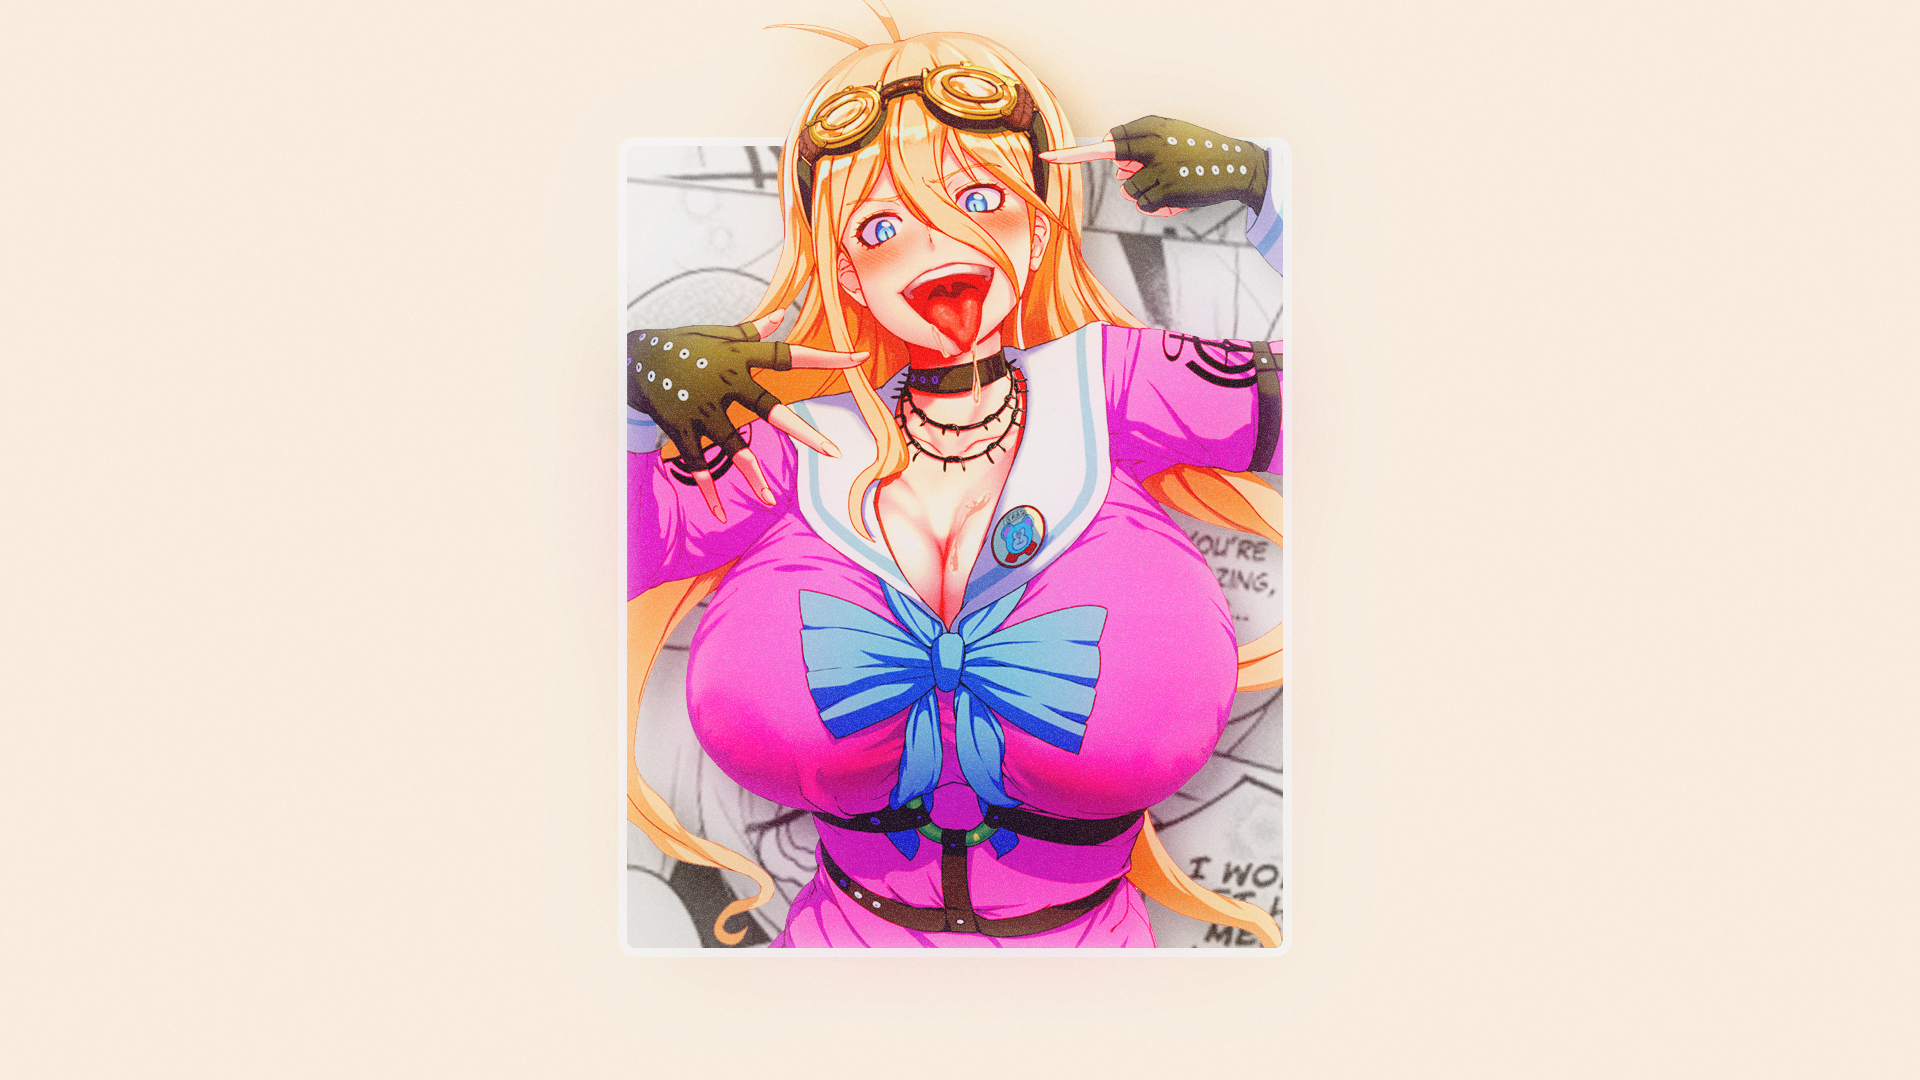 Anime 1920x1080 anime anime girls minimalism simple background picture-in-picture speech bubble Danganronpa Iruma Miu open mouth tongue out blonde blue eyes big boobs goggles cleavage manga